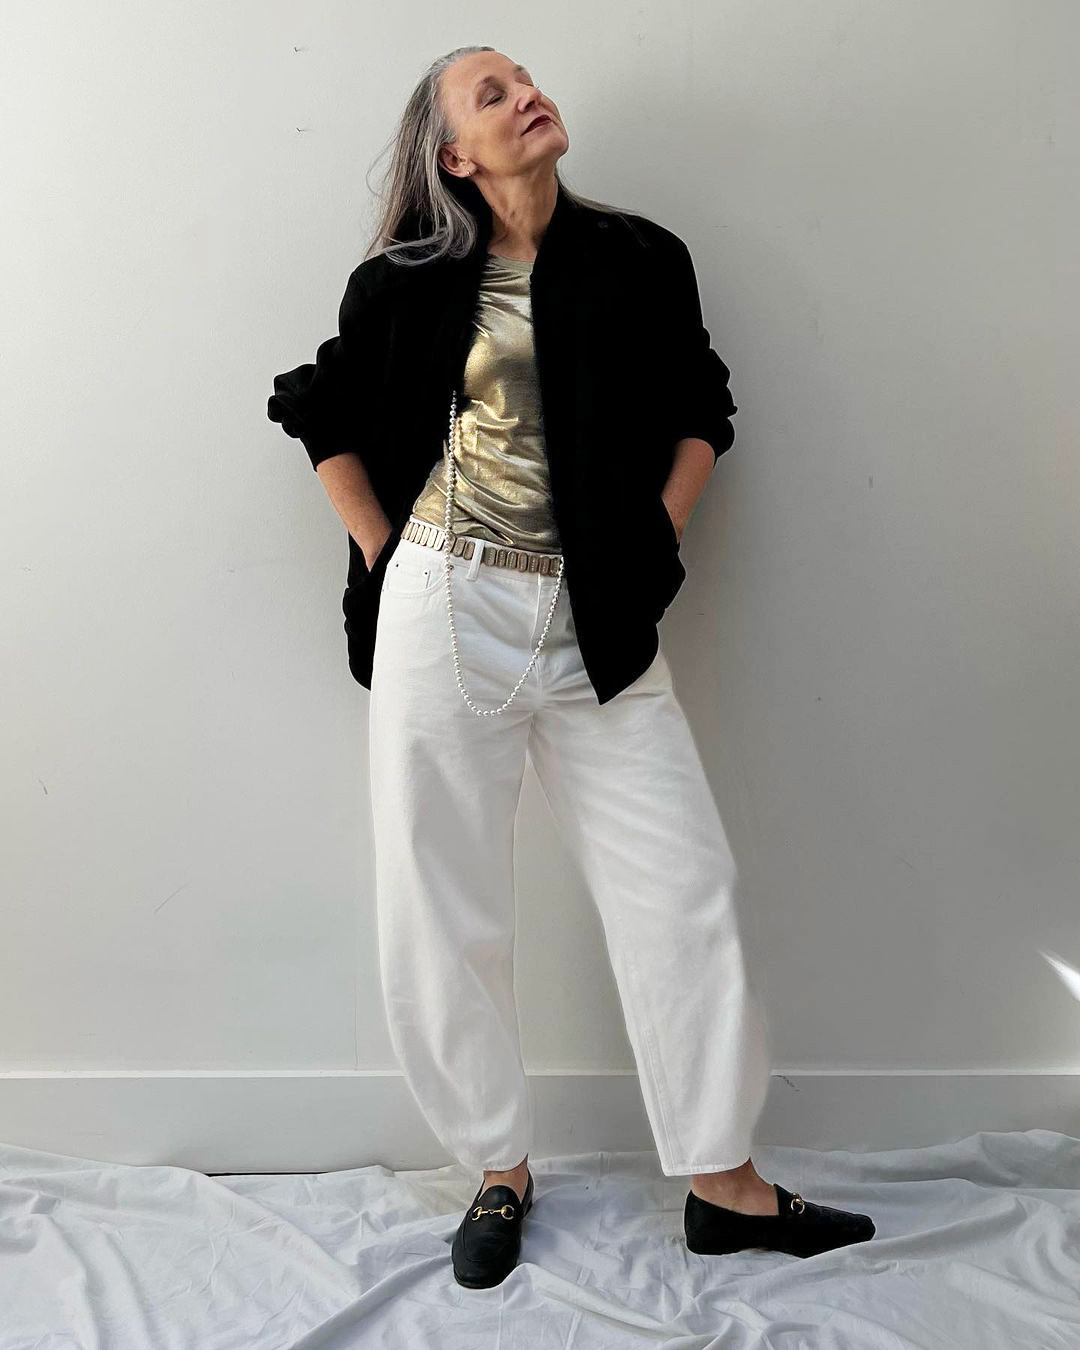 Five stylish older influencers and the outfits they're wearing this spring  — That's Not My Age